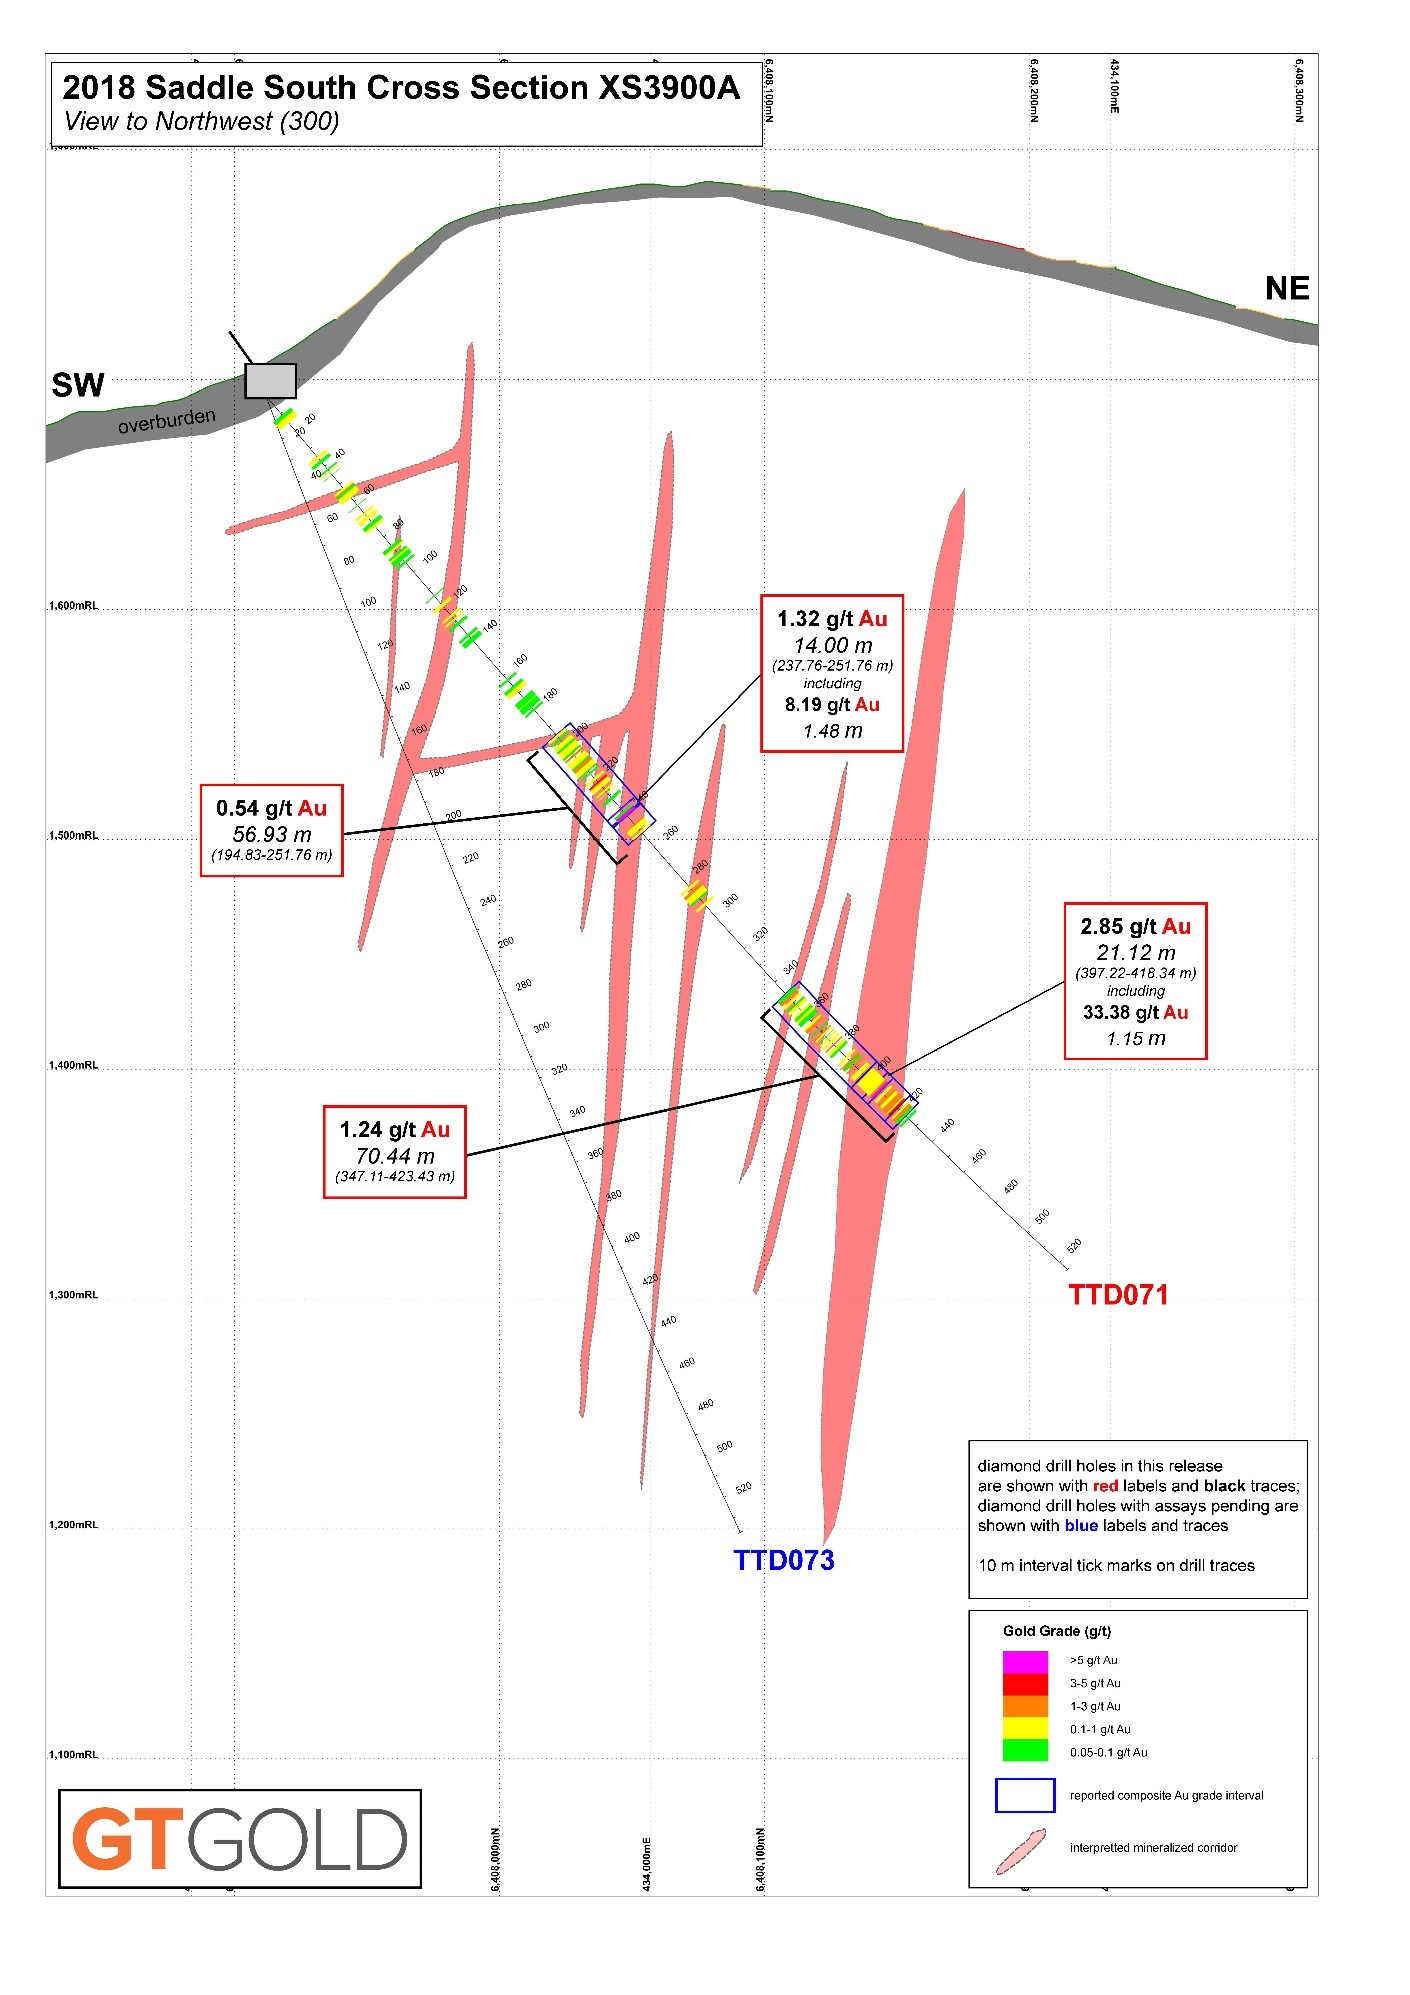 Saddle South Drilling Cross-Section 3900A, August 8, 2018